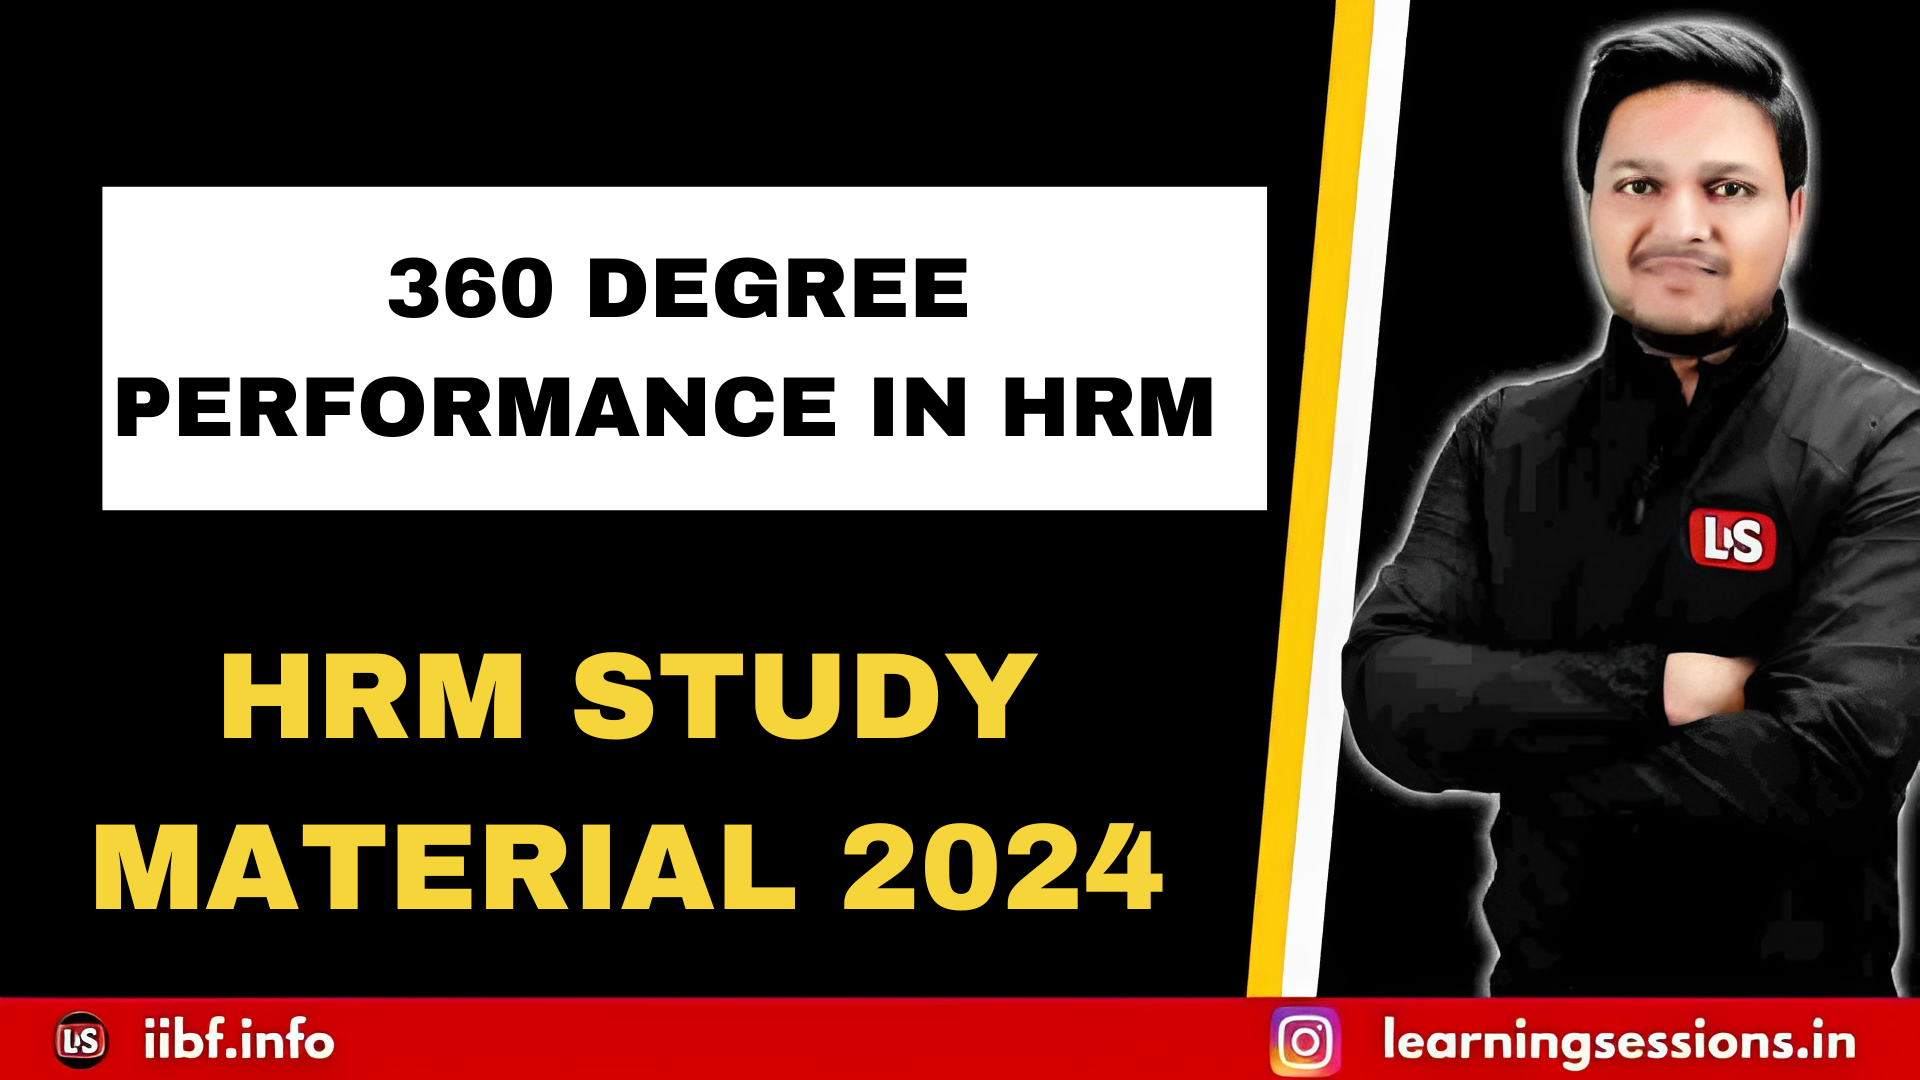 HRM STUDY MATERIAL 2024